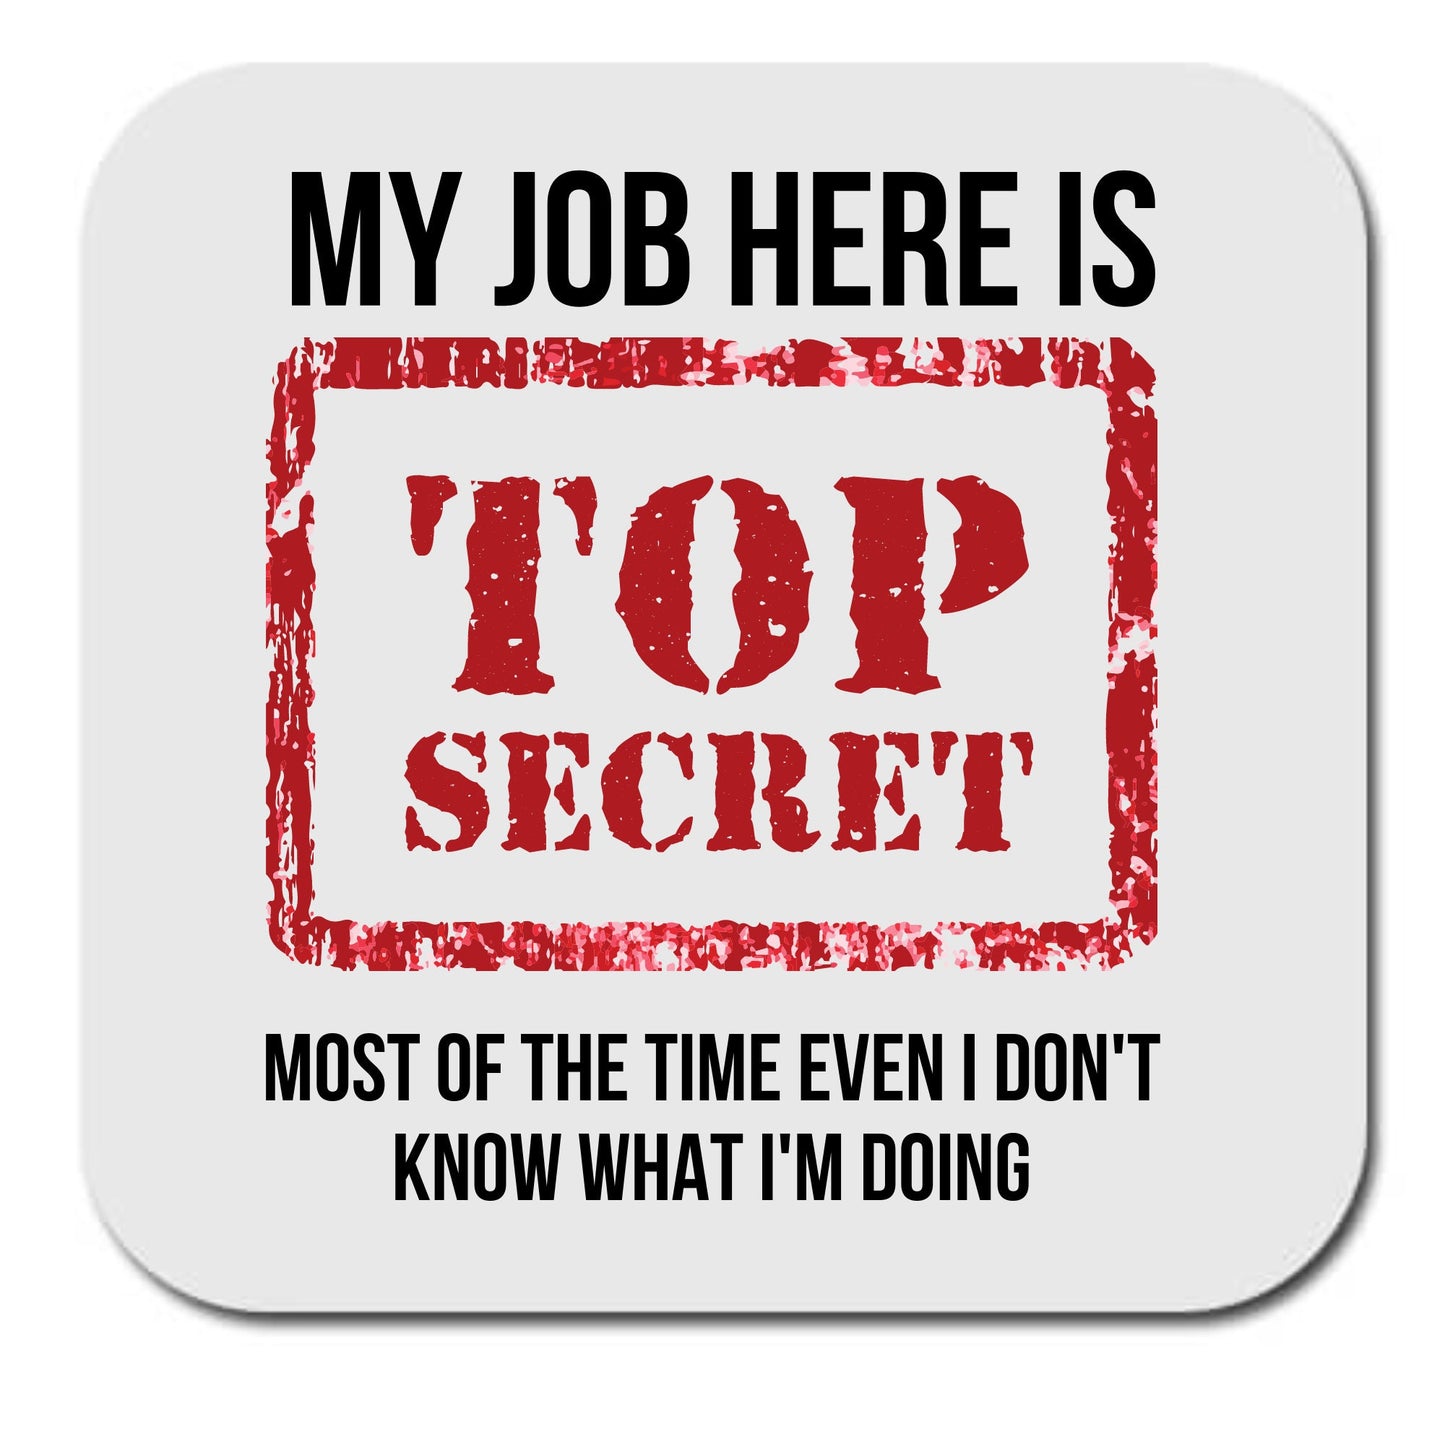 My Job here is Top Secret, even I don't know what I'm doing mug and coaster